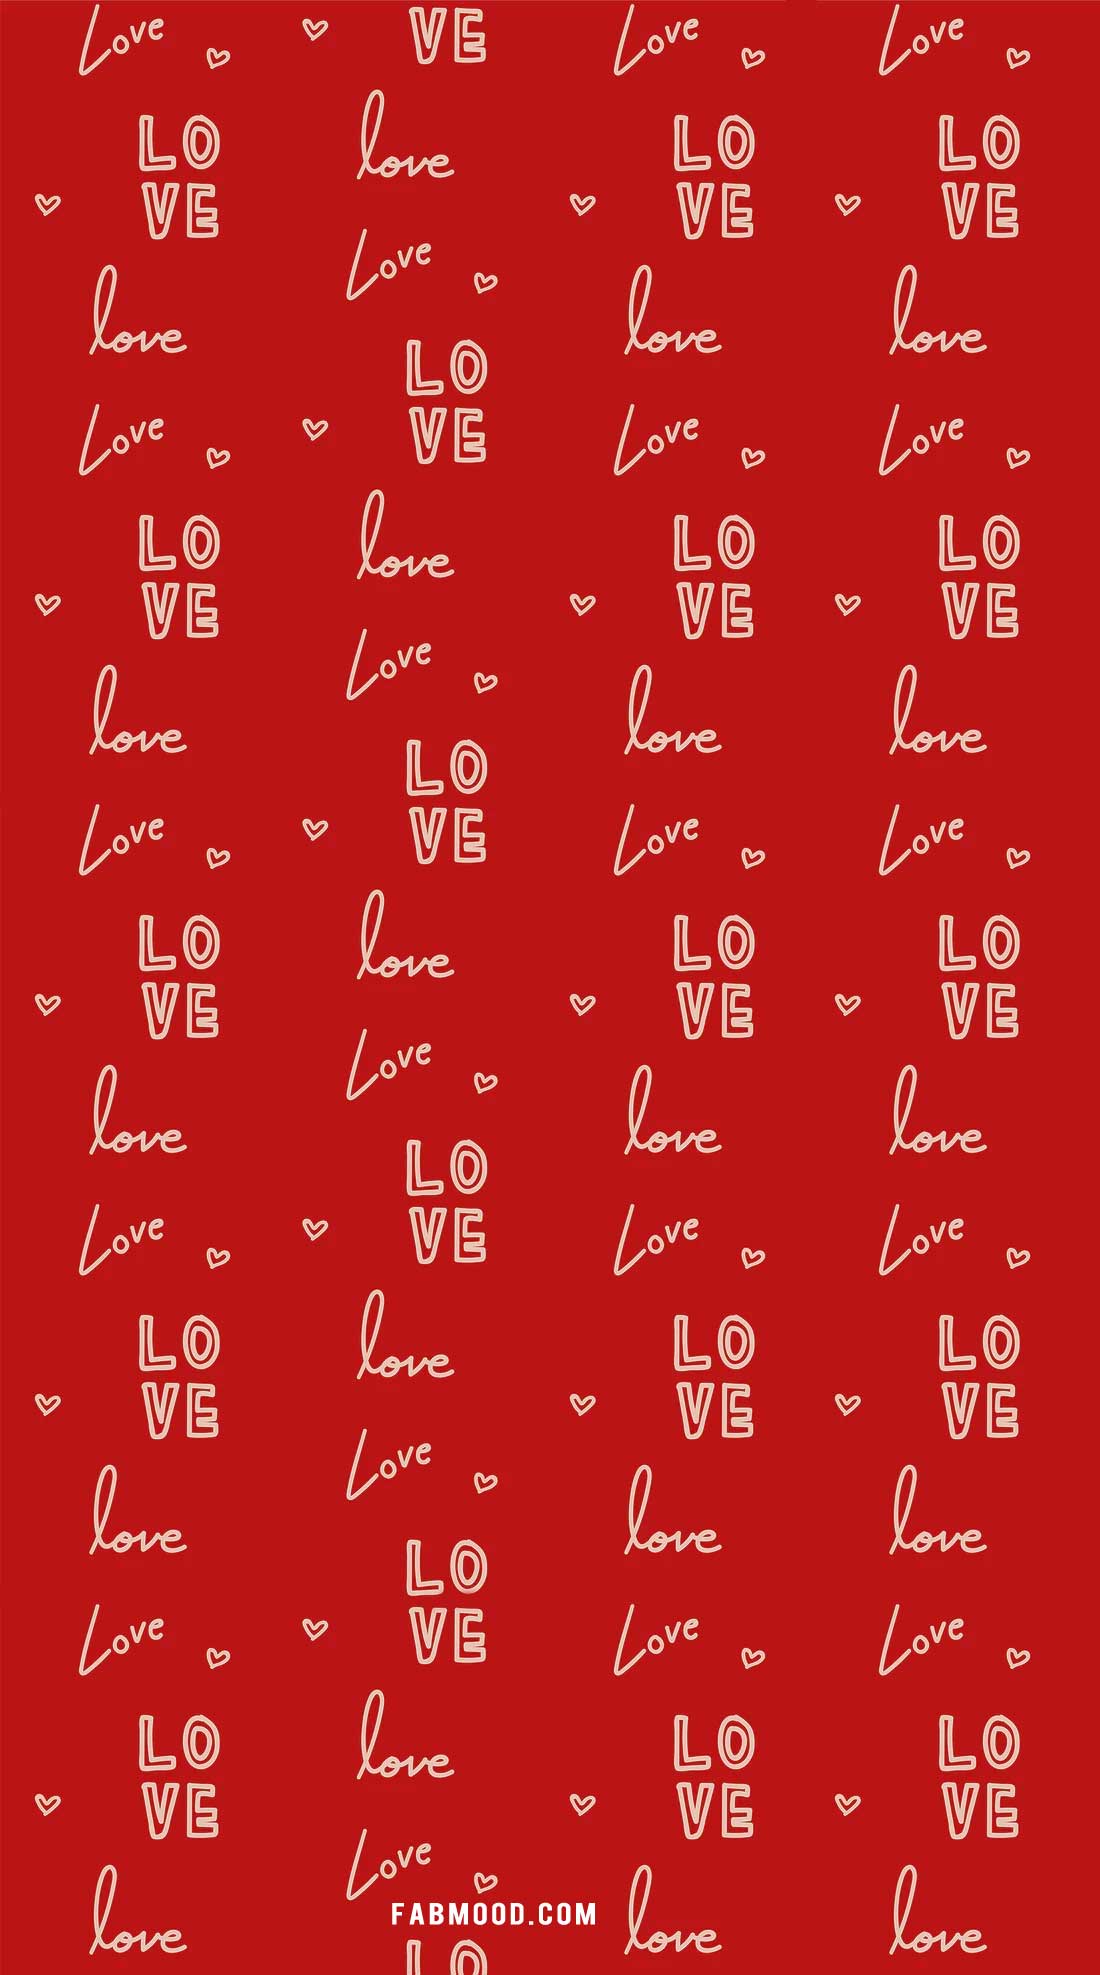 Be Linspired: Valentine's Day  Free iPhone Wallpaper Downloads